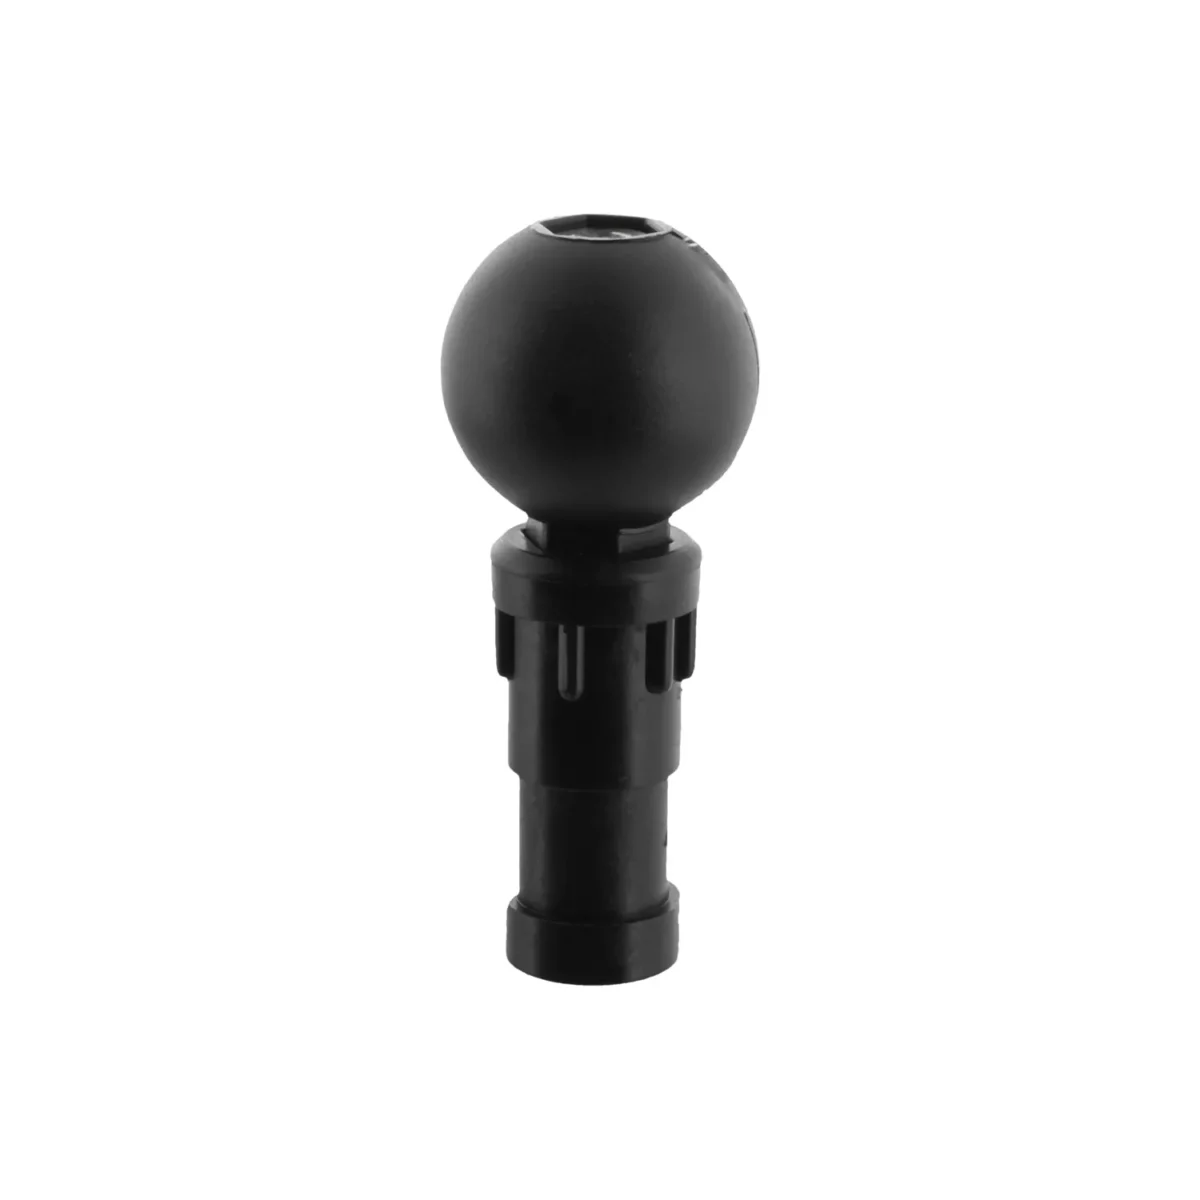 Scotty 169 1.5″ Ball with post